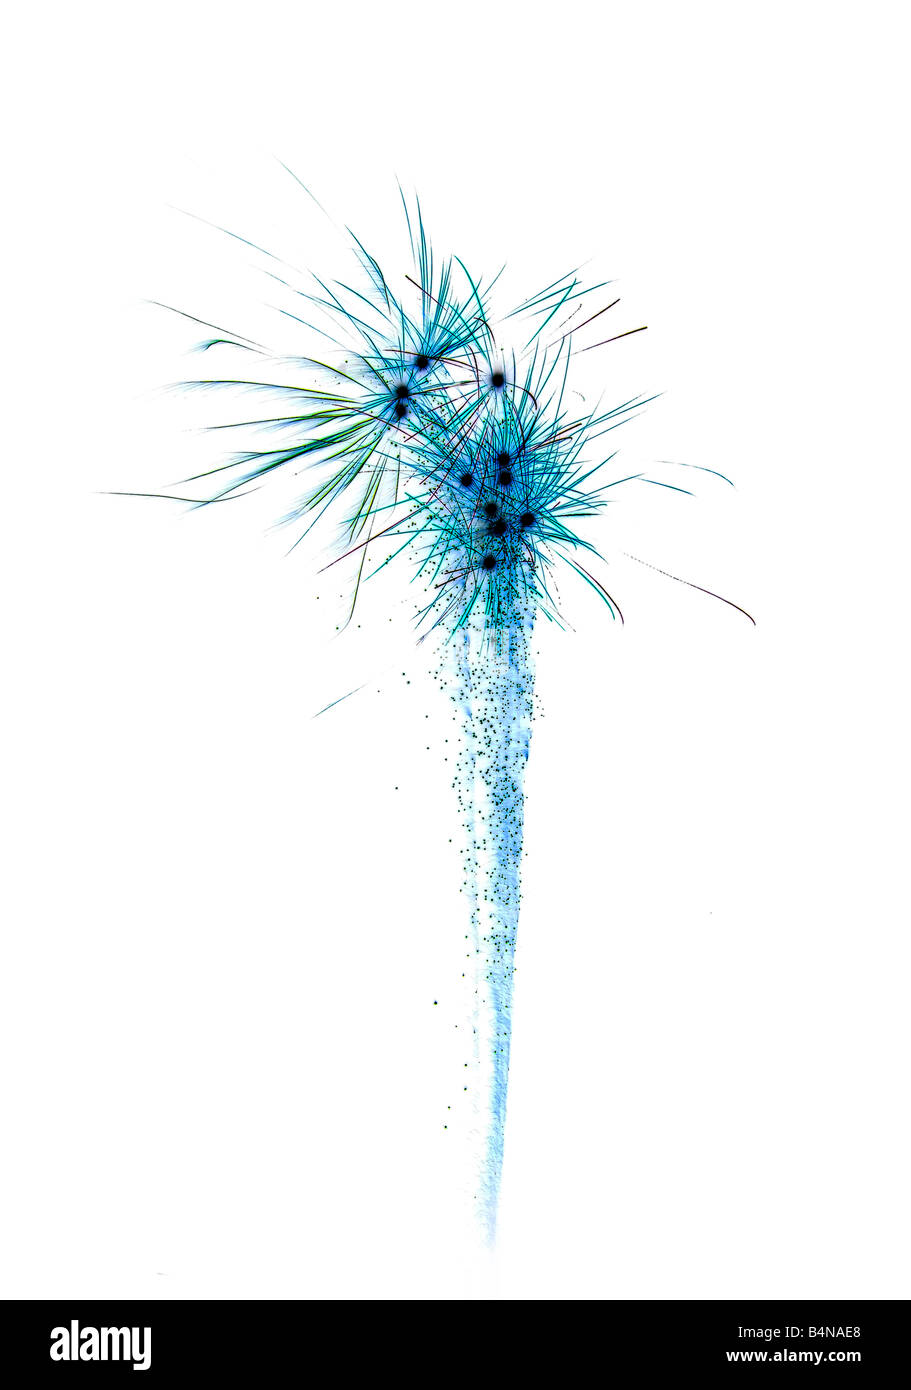 image of an explosion of a firework during a celebration Stock Photo